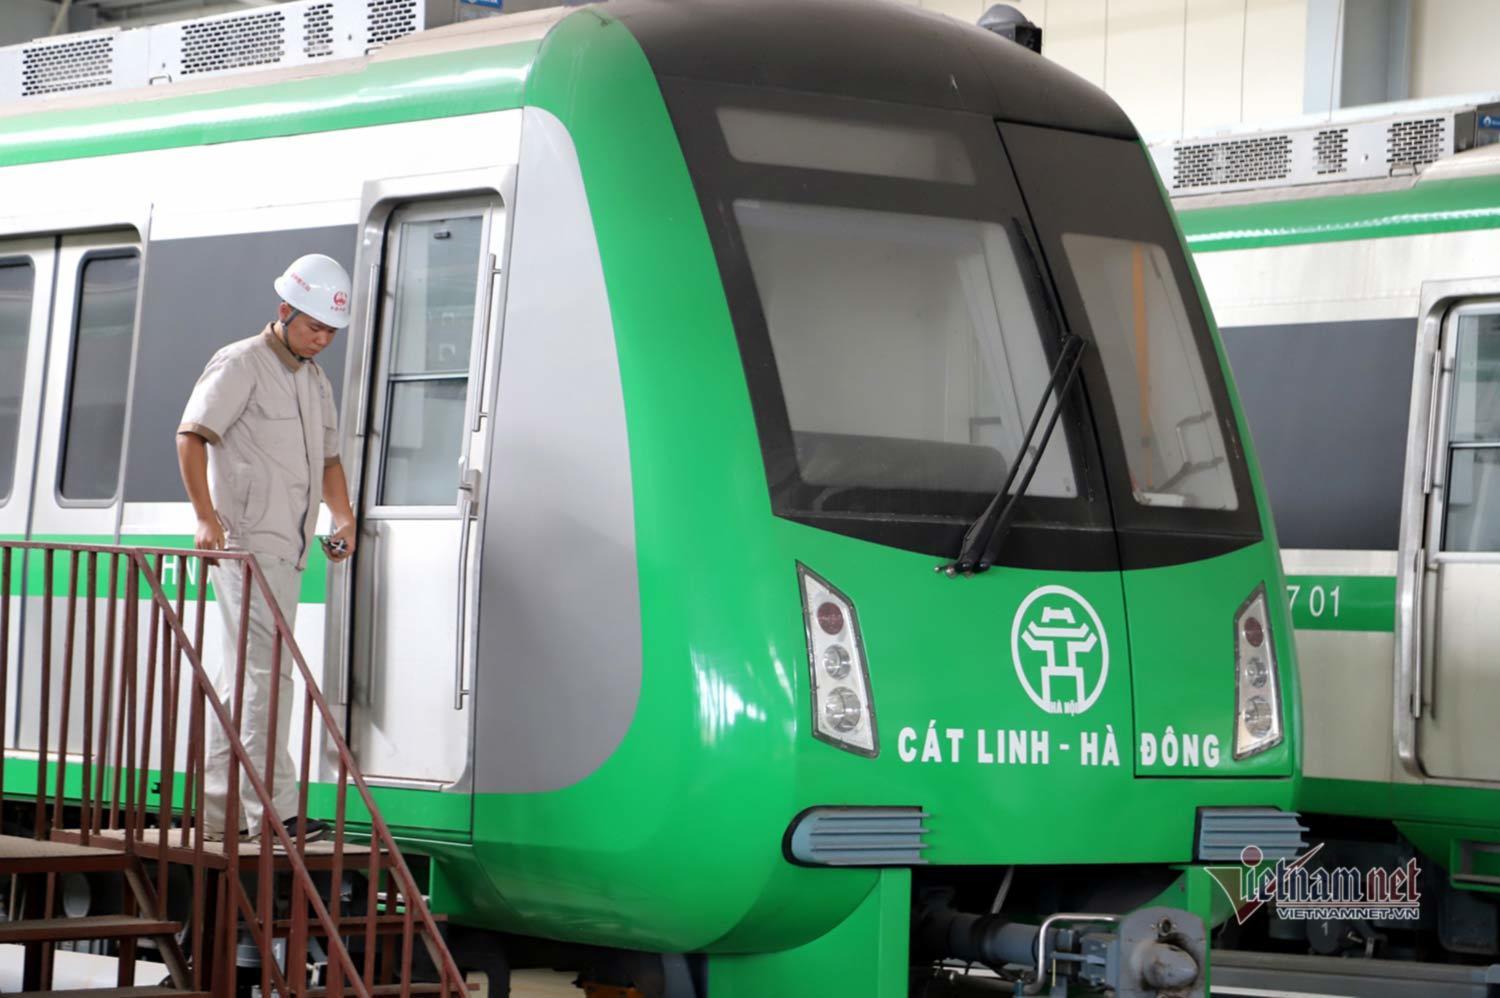 Cat Linh – Ha Dong railway still not operating, Hanoi sends letter to PM